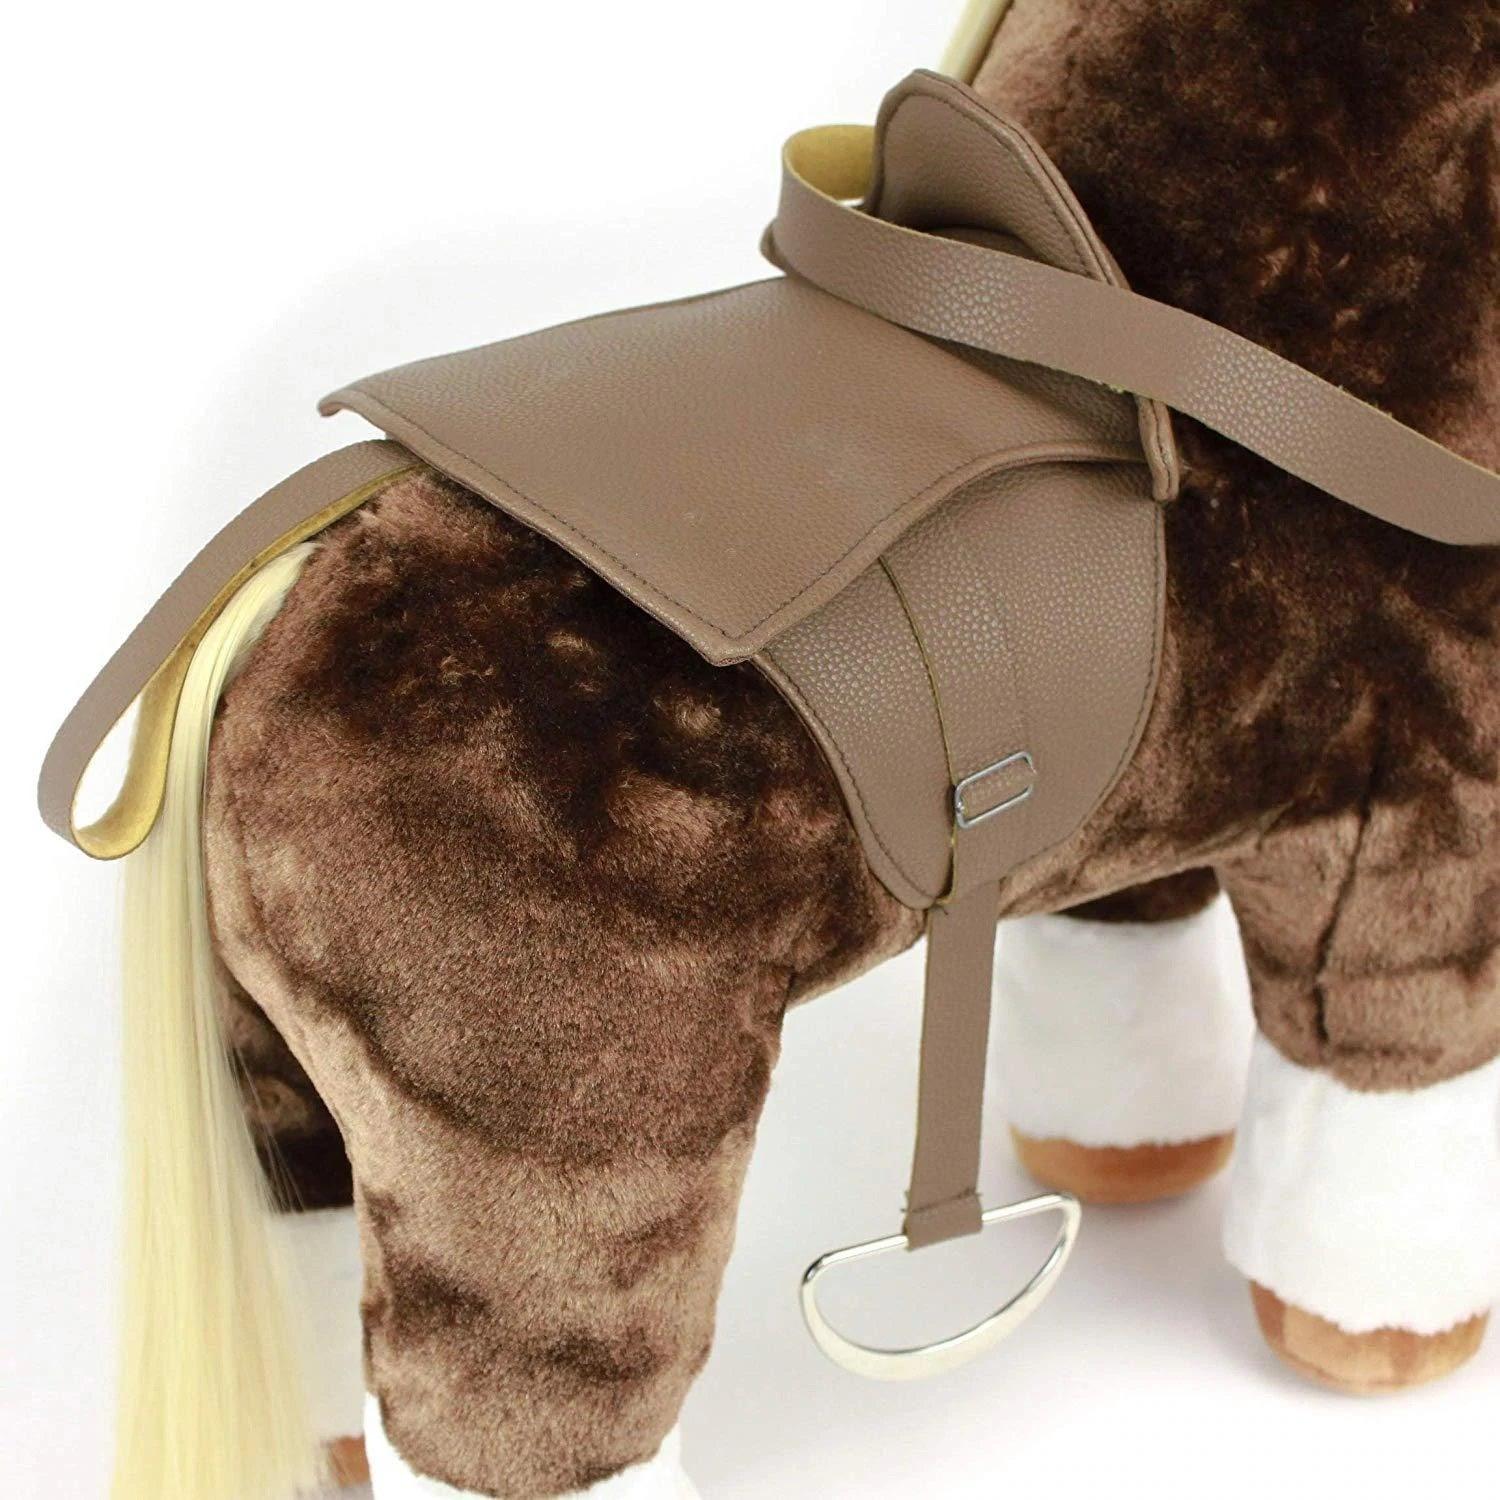 Playtime by Eimmie Doll Accessories Plush Horse with Saddle for 18 Inch Dolls - OrangeOnions Wholesale